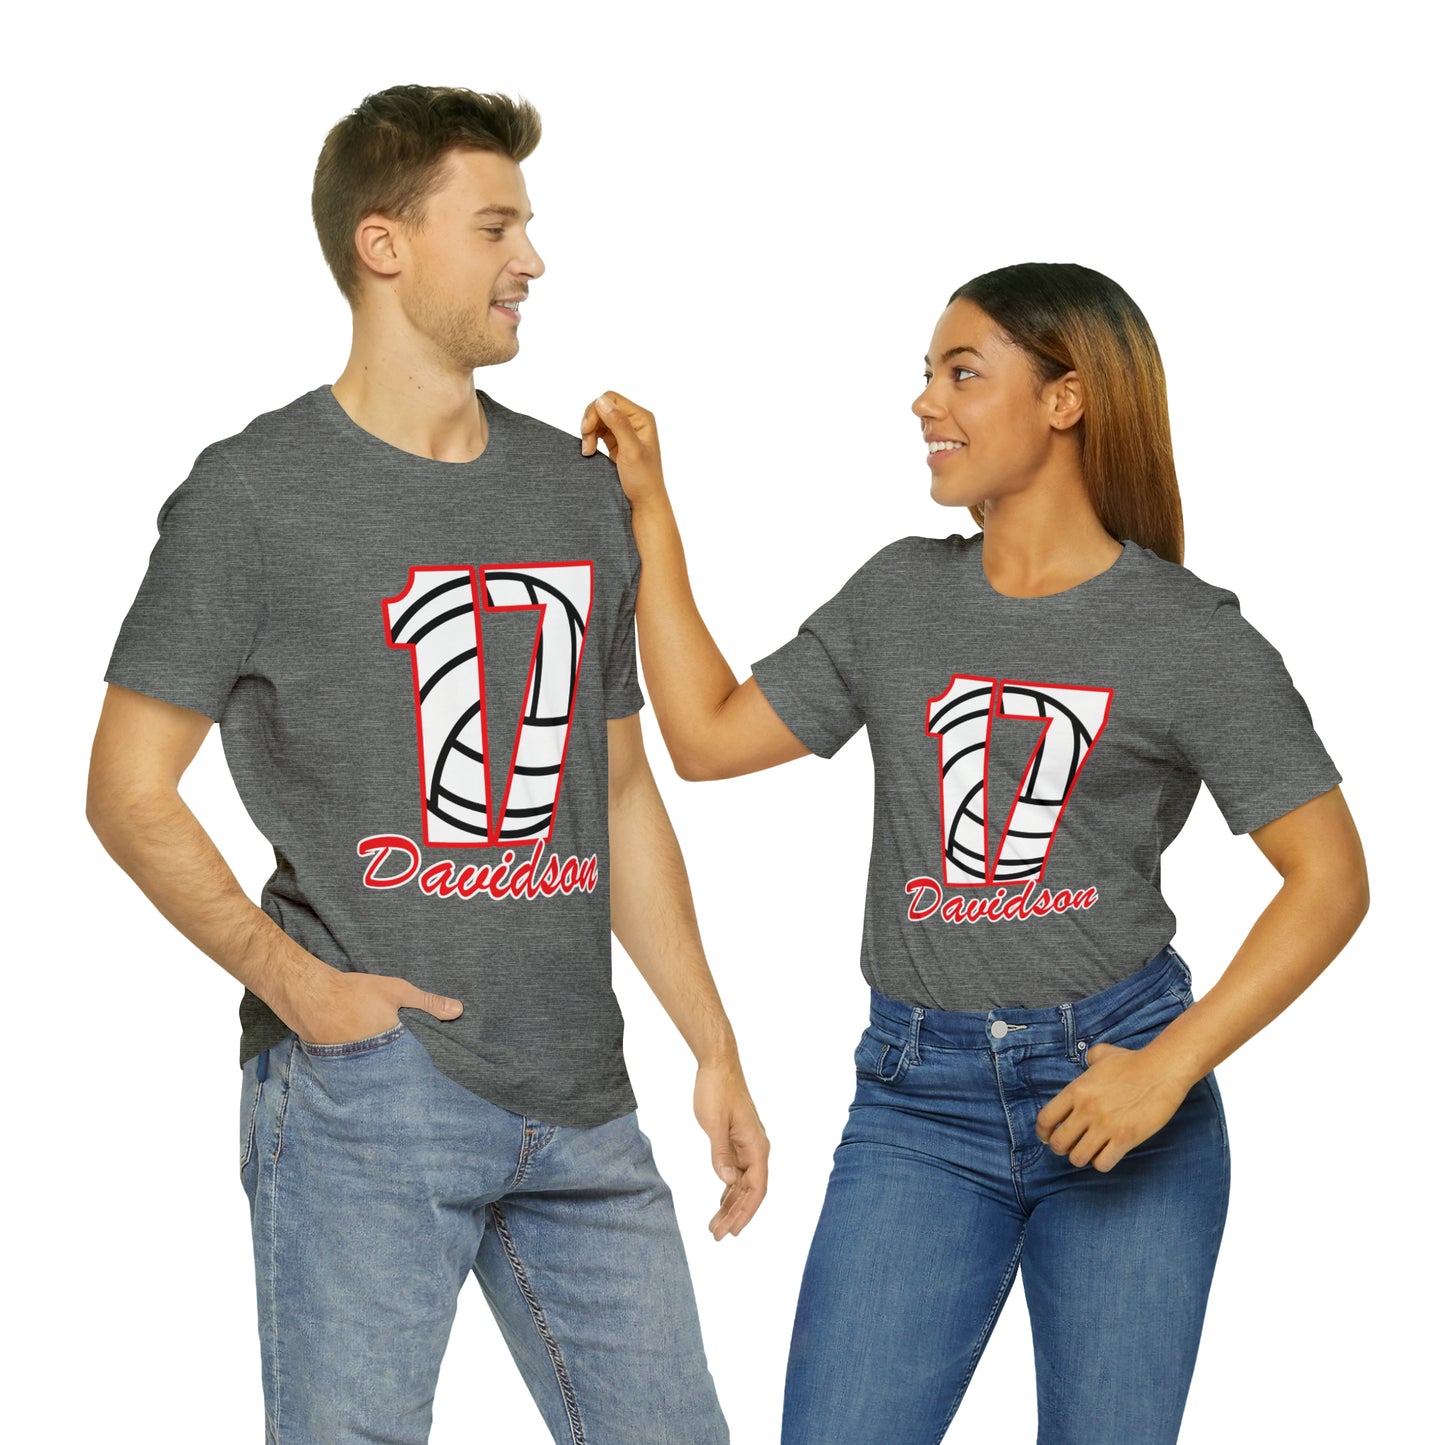 PERSONALIZED - Volleyball Name/Number Short Sleeve Tee